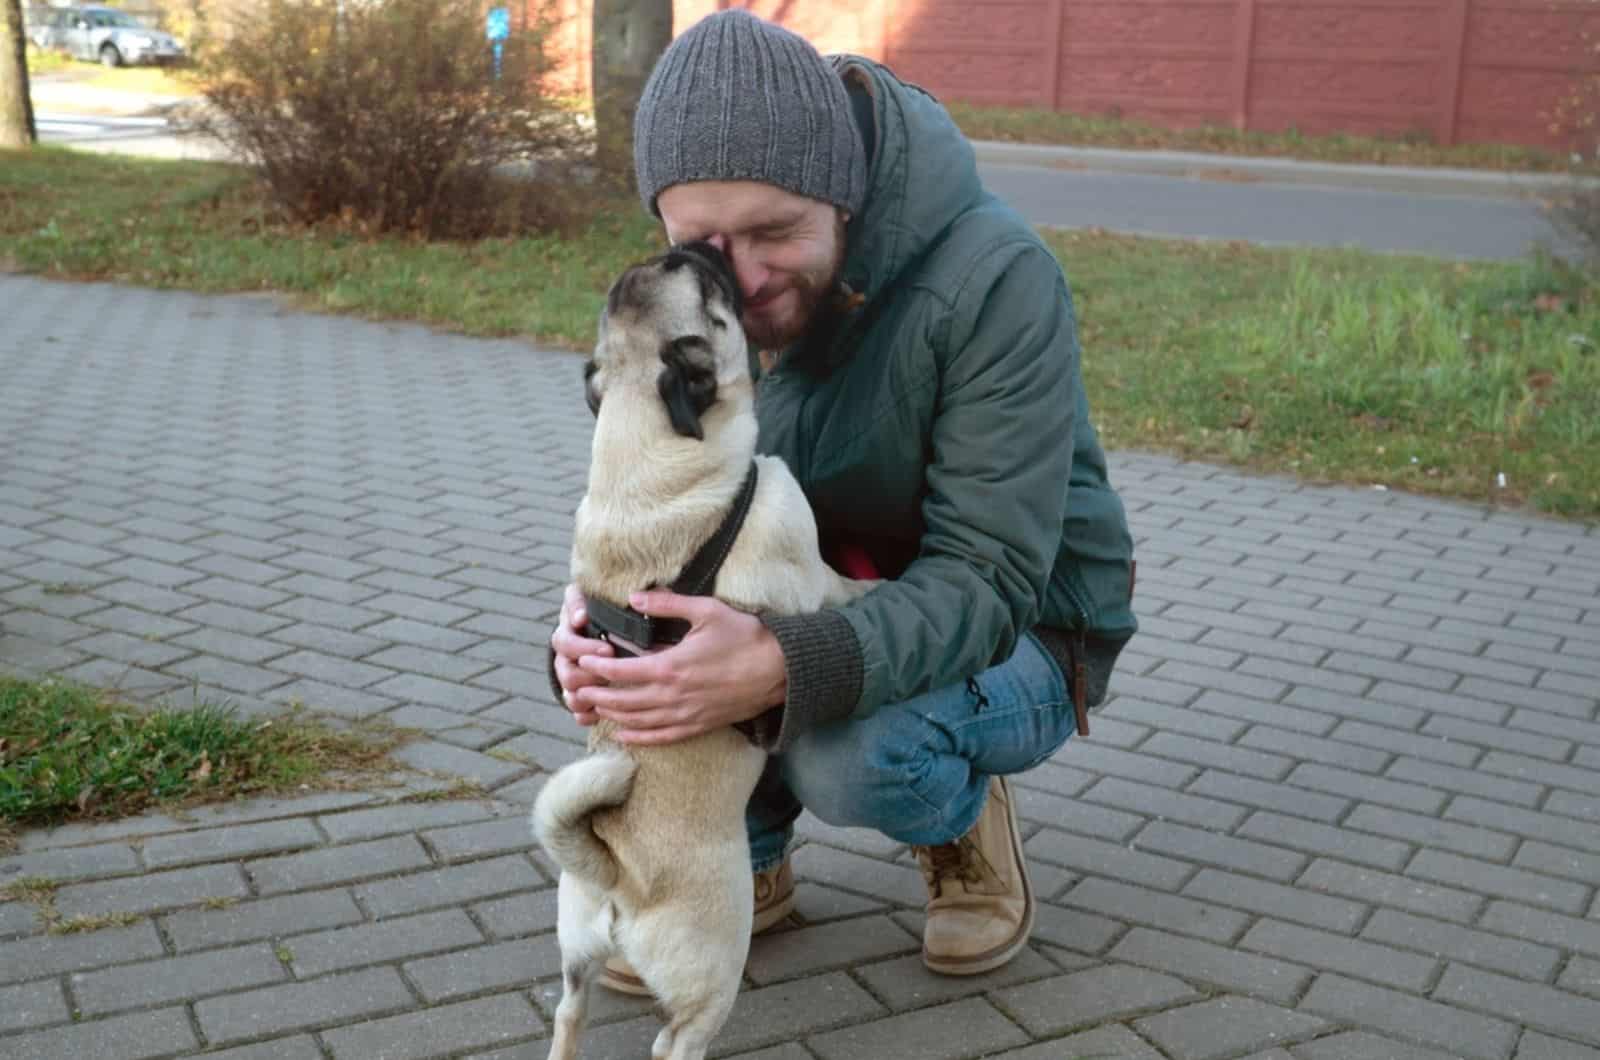 pug dog licks owner's face while walking outdoors